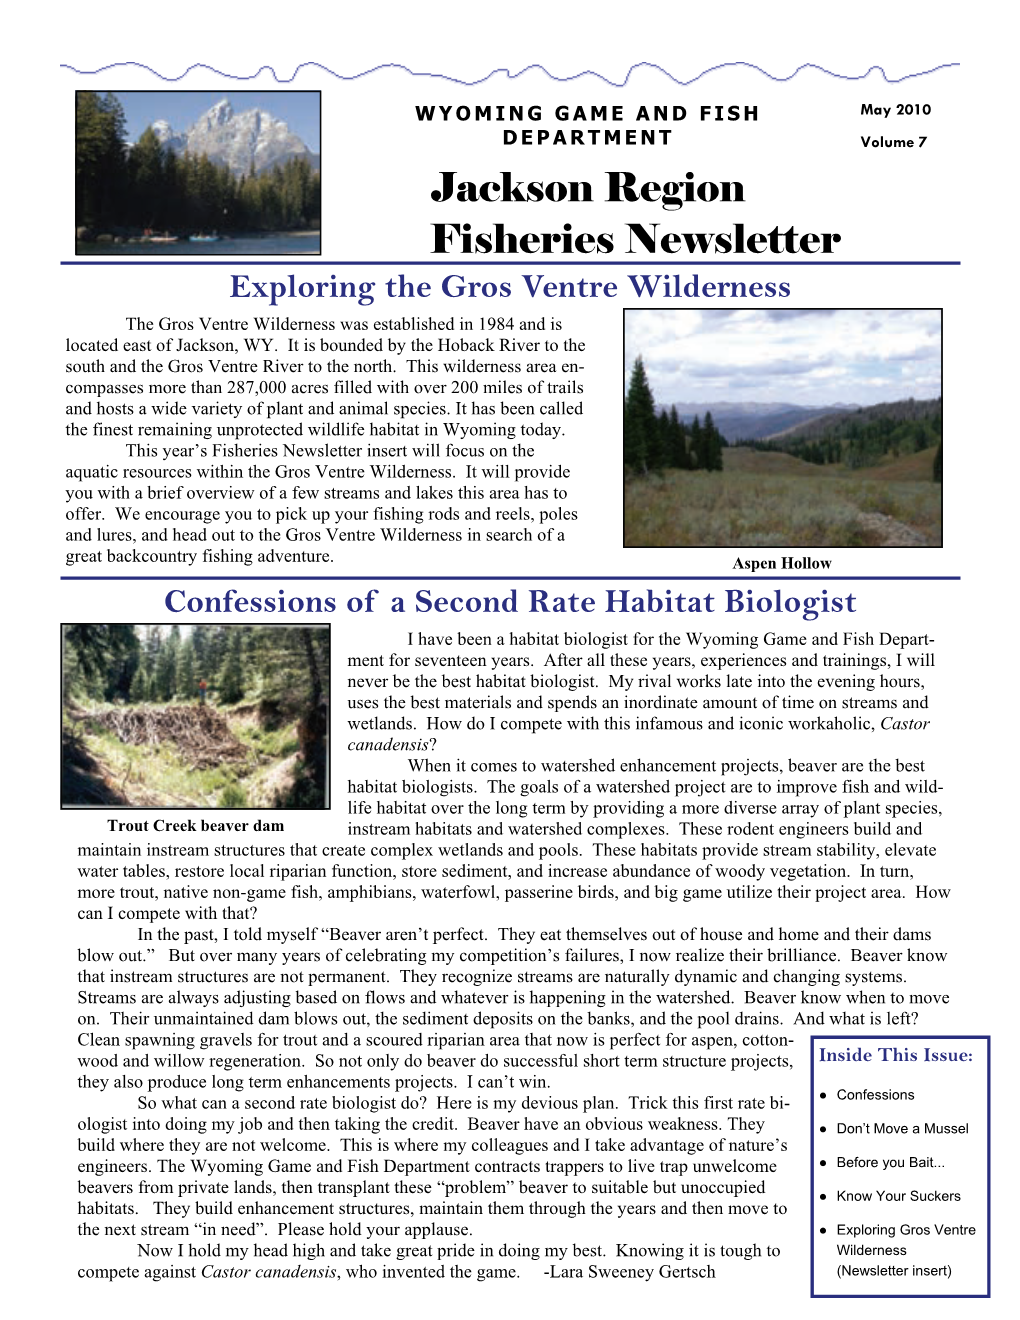 Jackson Region Fisheries Newsletter Exploring the Gros Ventre Wilderness the Gros Ventre Wilderness Was Established in 1984 and Is Located East of Jackson, WY